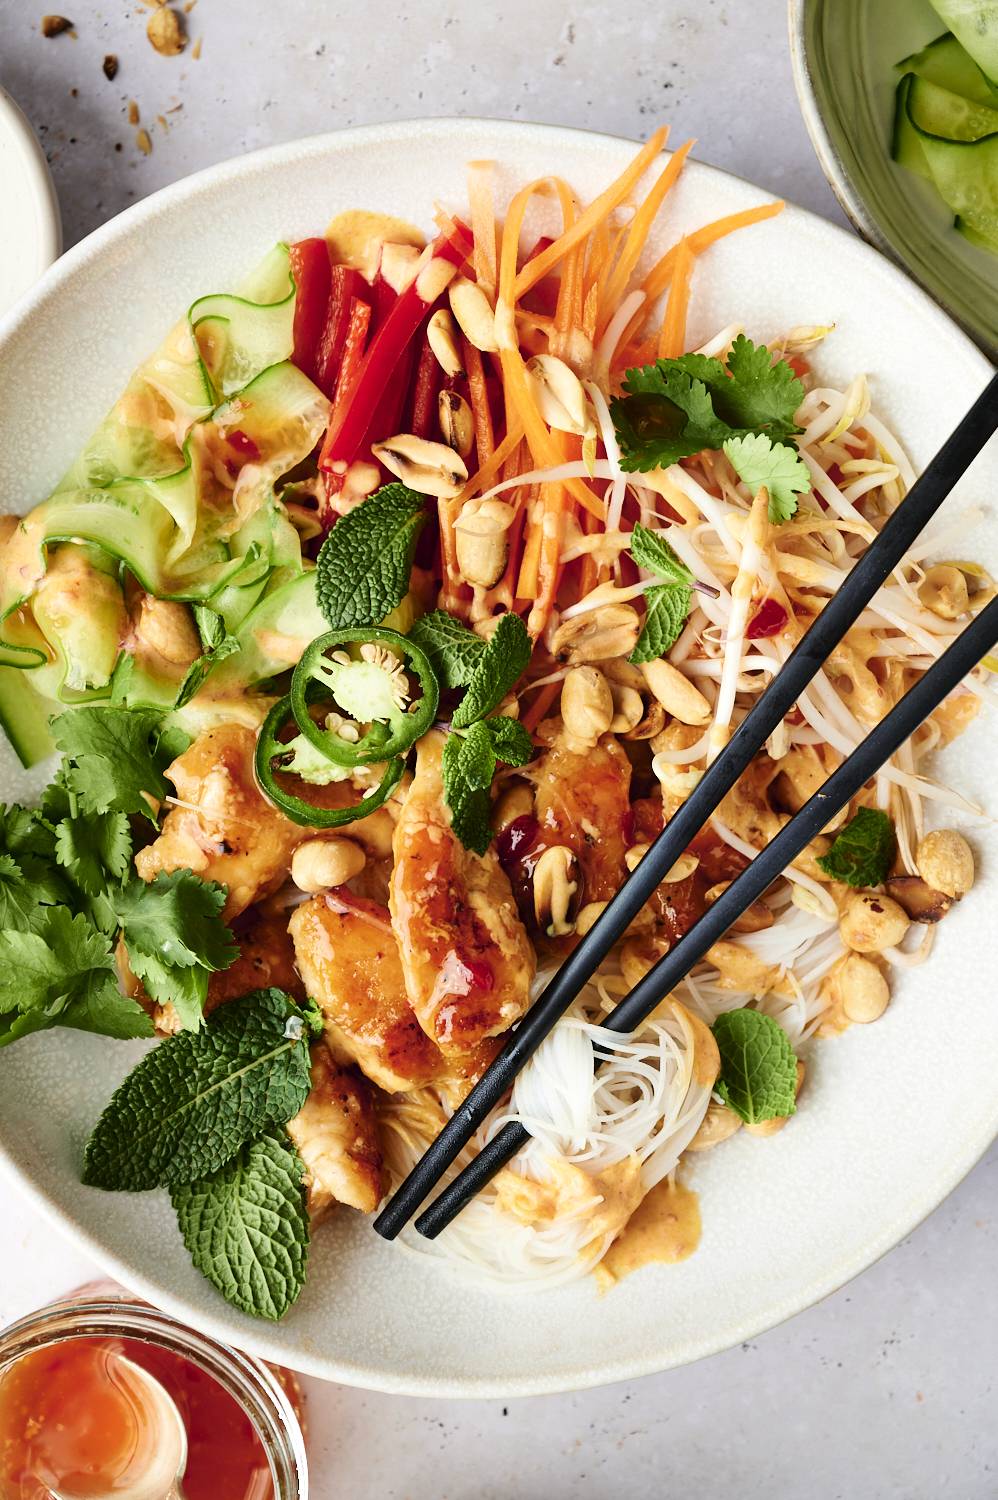 Vietnamese vermicelli noodle bowls with sweet chili chicken, noodles, vegetables, herbs, peanuts, and spicy sauce in bowl with chopsticks.